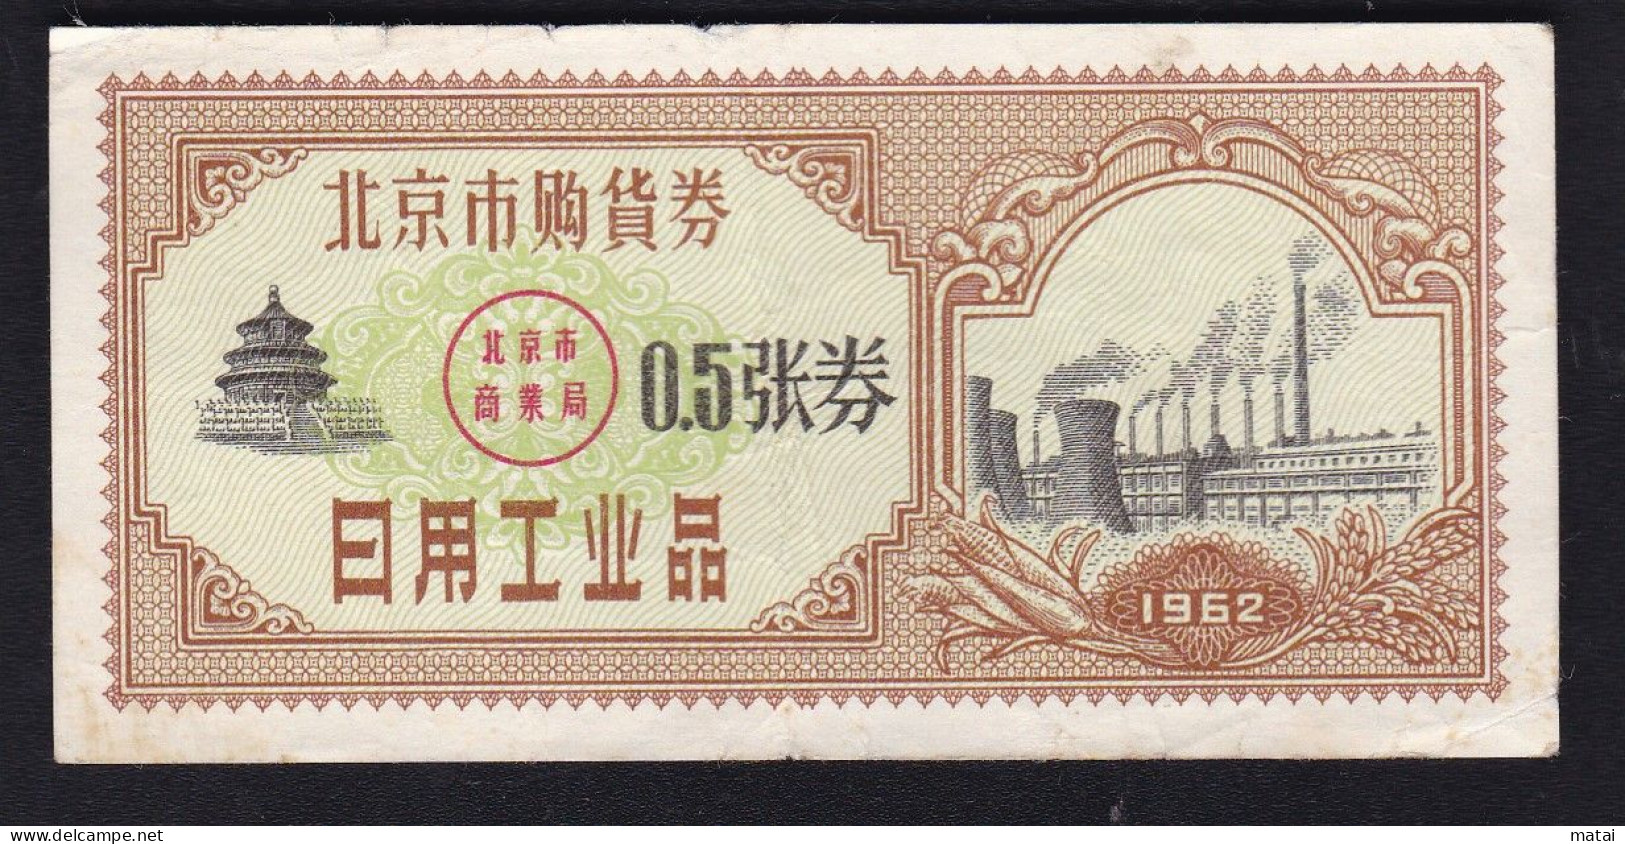 CHINA CHINE 1962 Beijing Purchase Voucher 0.5 Coupon - Tickets - Vouchers